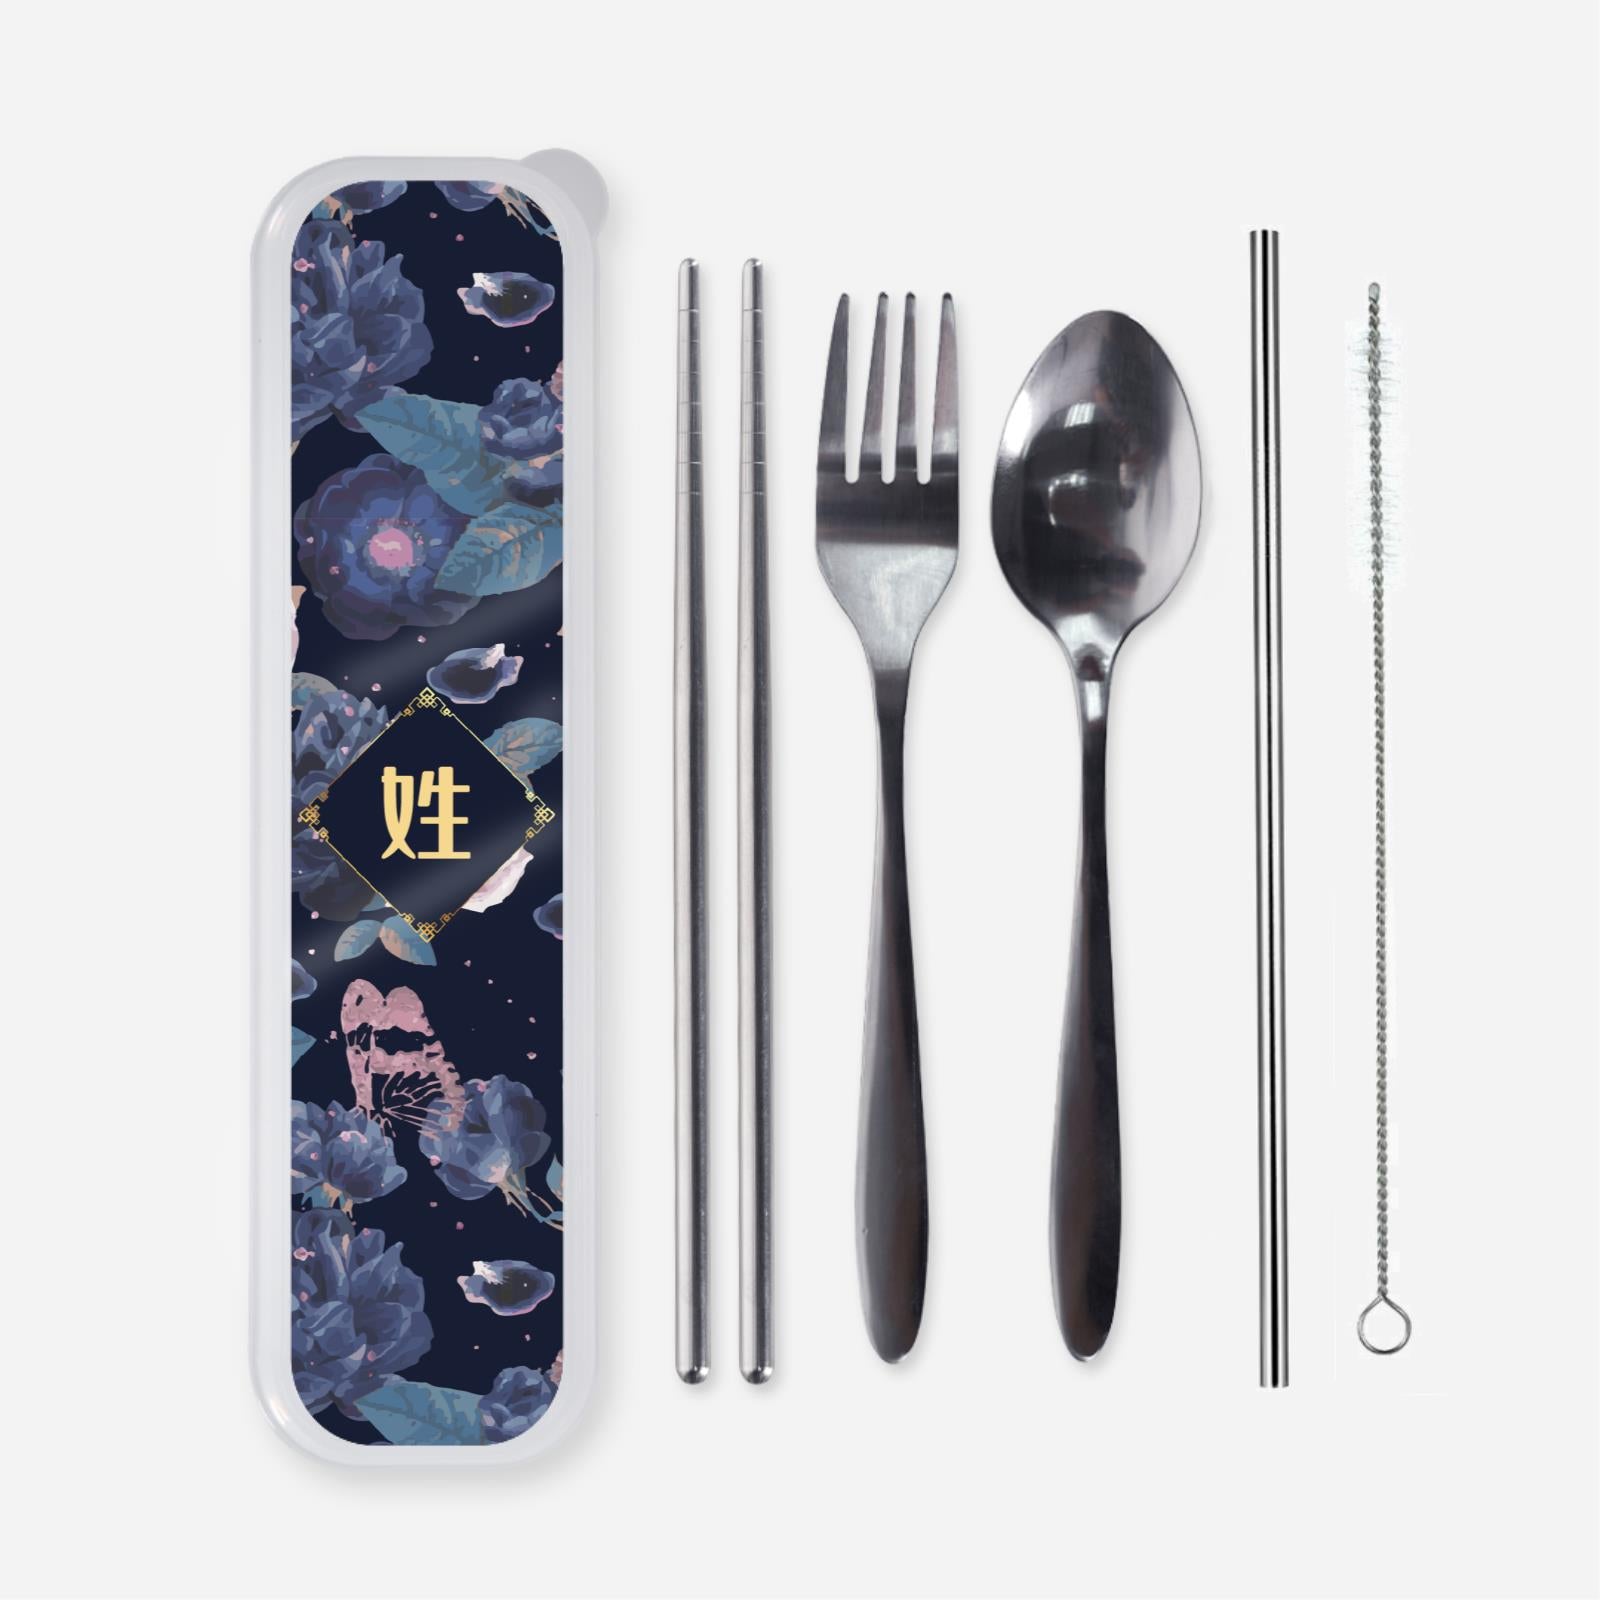 Royal Floral Series - Serene Moonlight Cutlery With Chinese Personalization